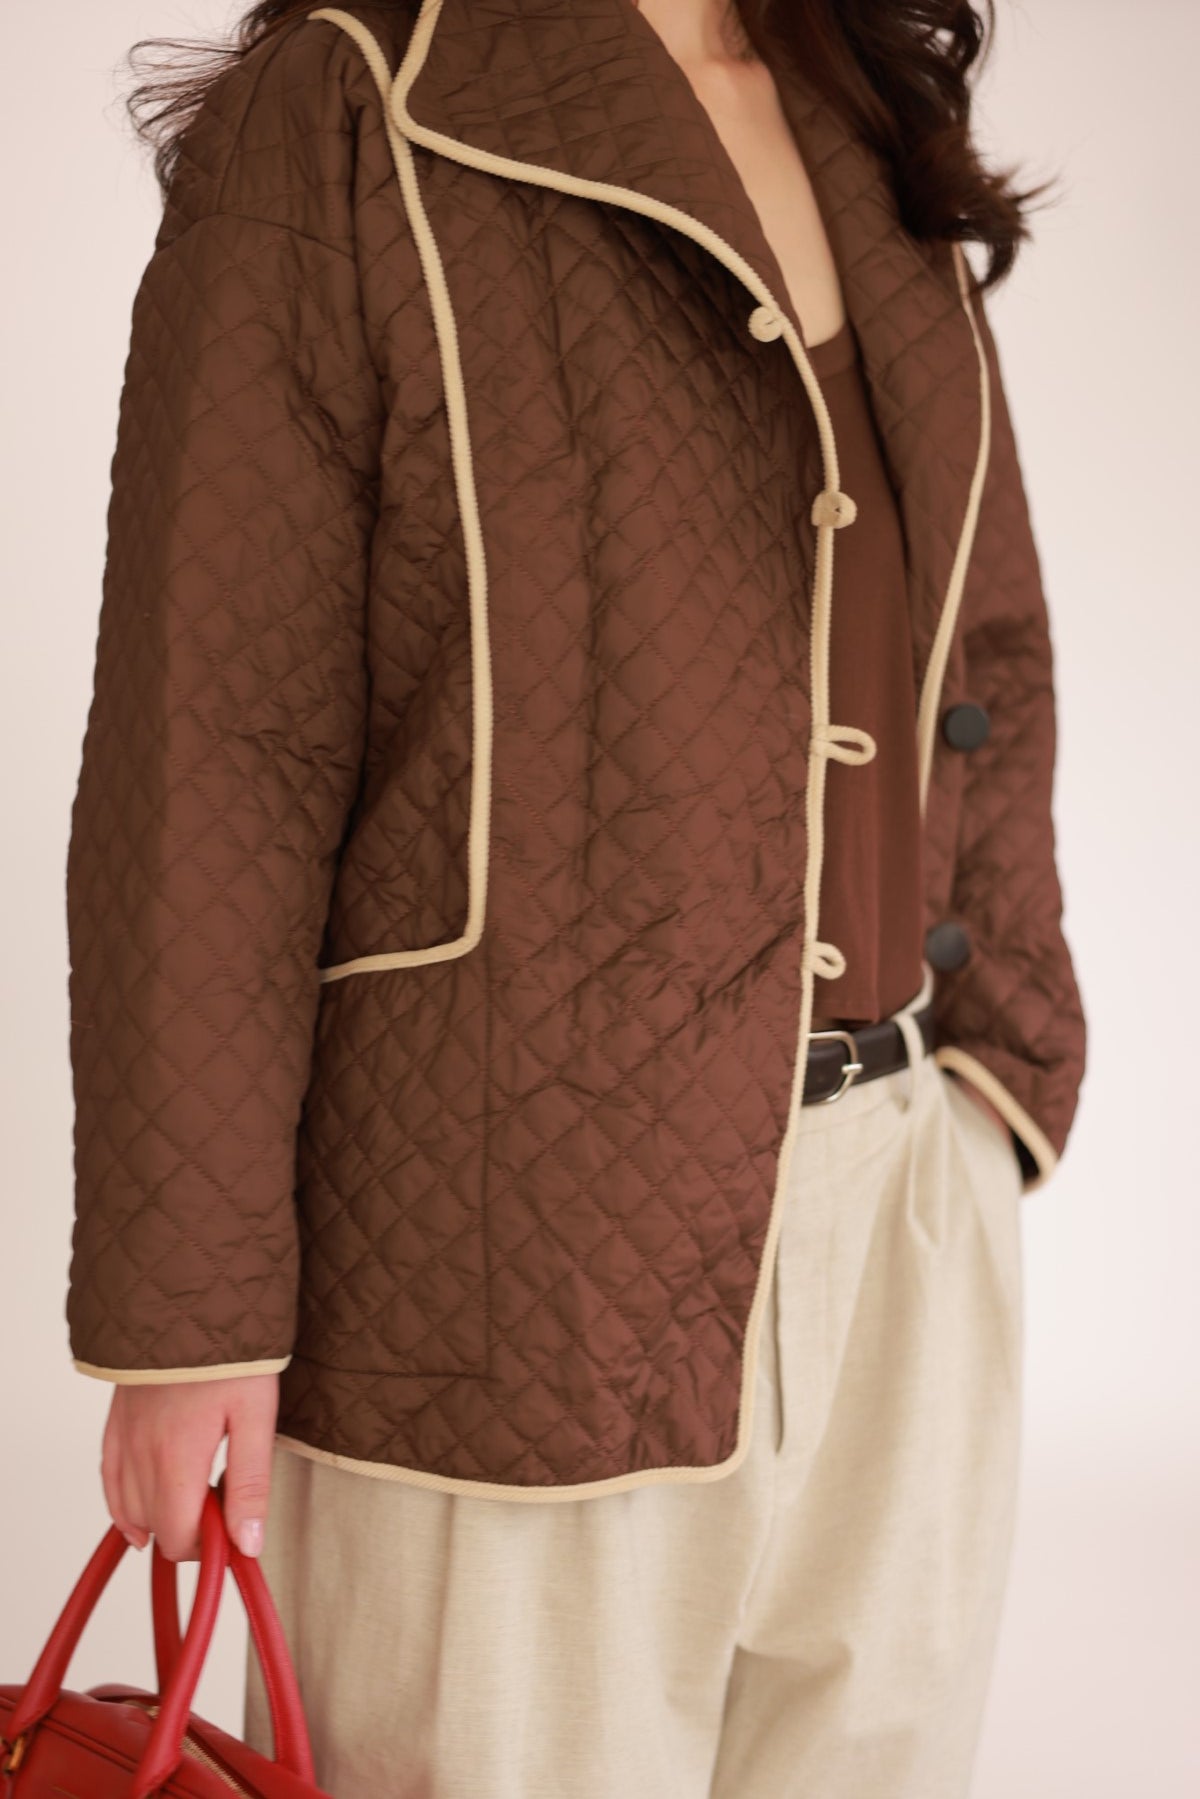 Thermo jacket